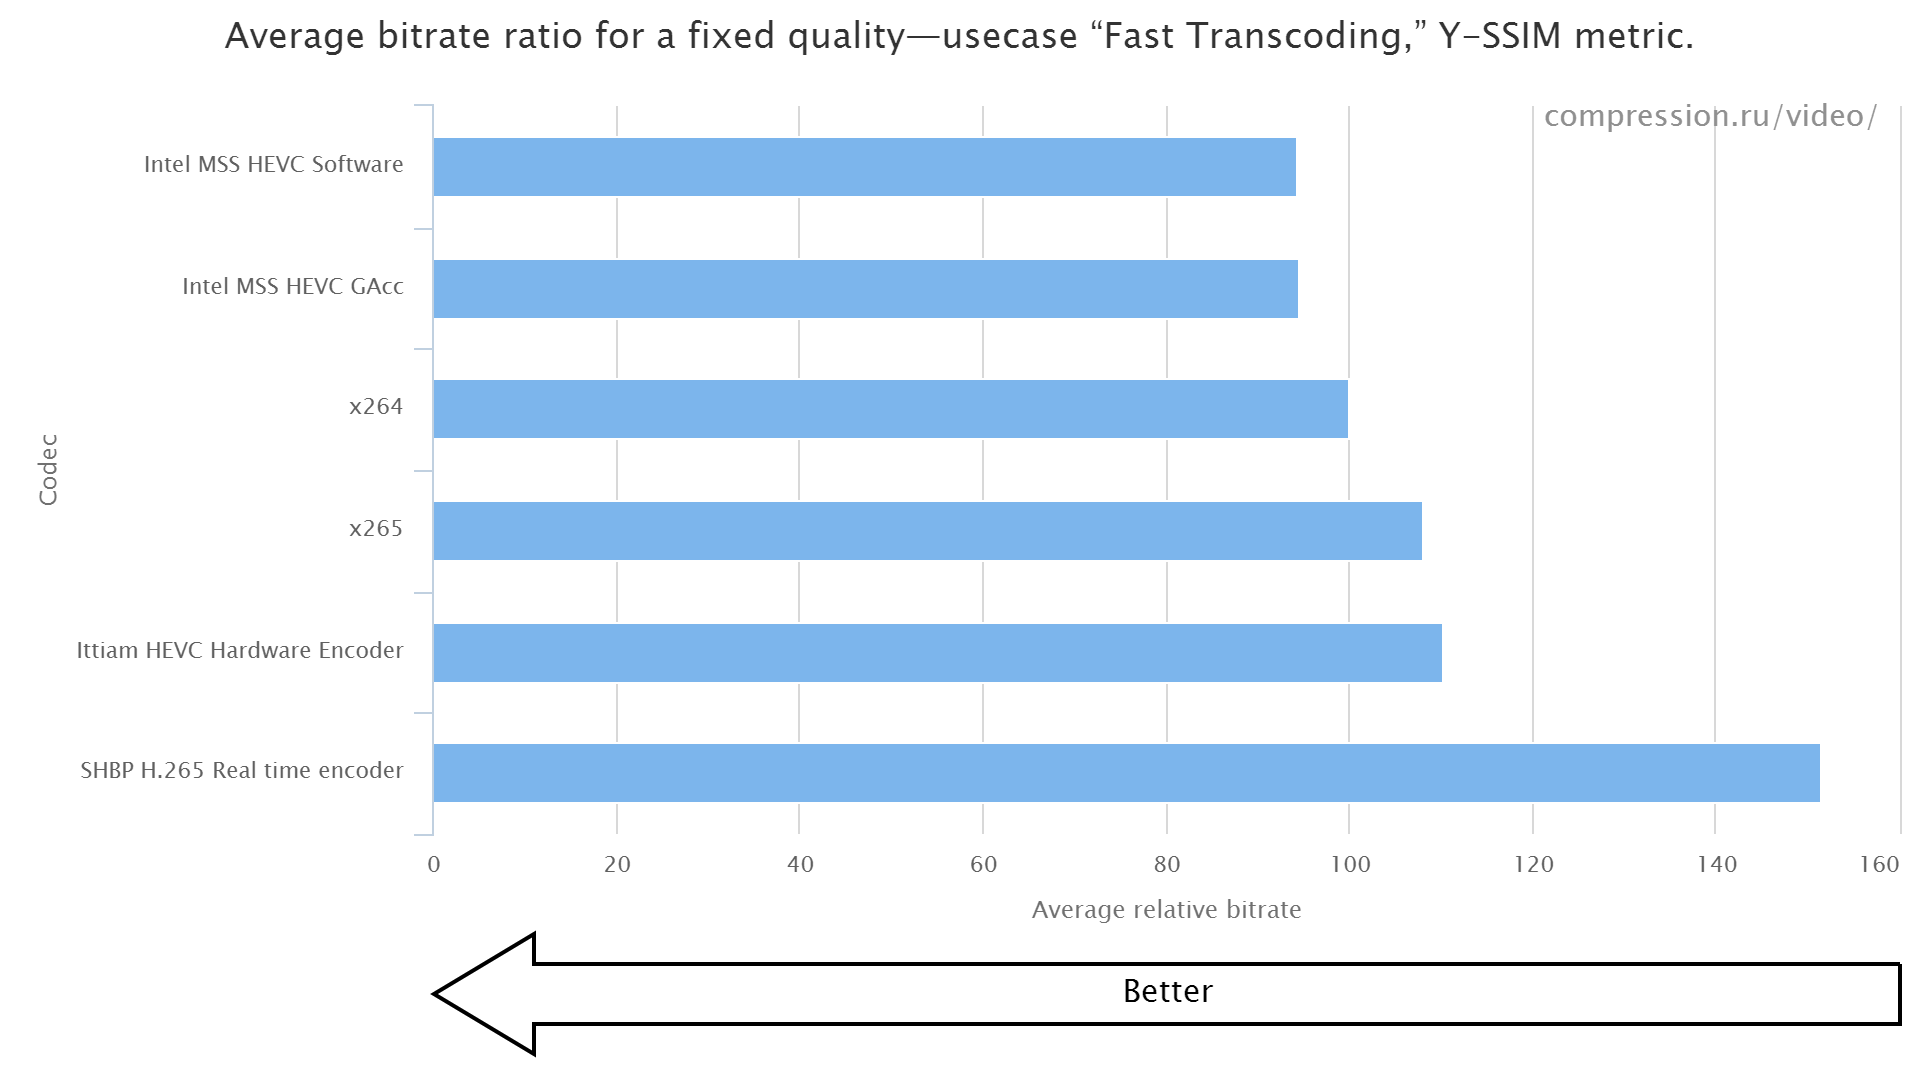 Average bitrate for Fast transcoding use-case (Y-SSIM metric)